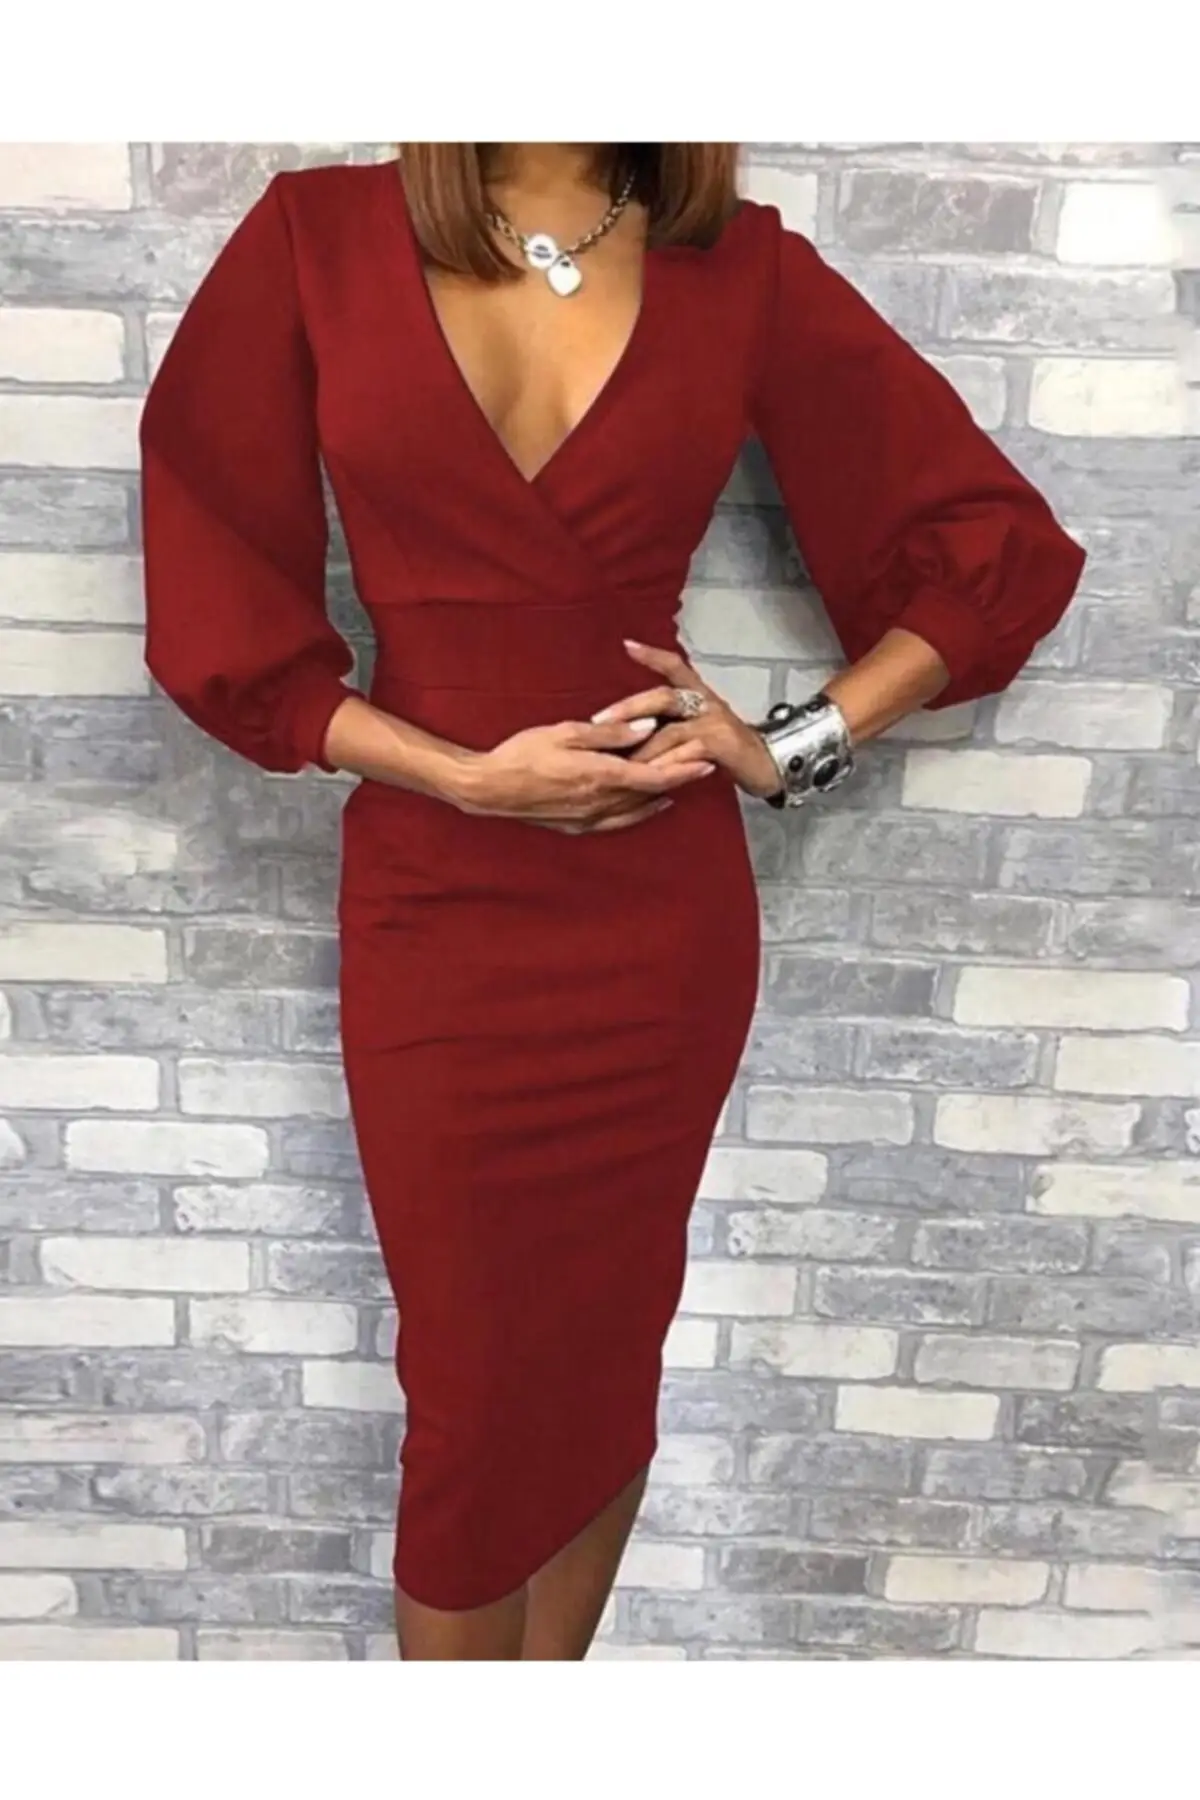 

Flexible Crepe Fabric Double-Breasted Neck Long Sleeve Burgundy Dress Bodycon Knitting Trend Solid Color Midi Non-Pocket Clothing